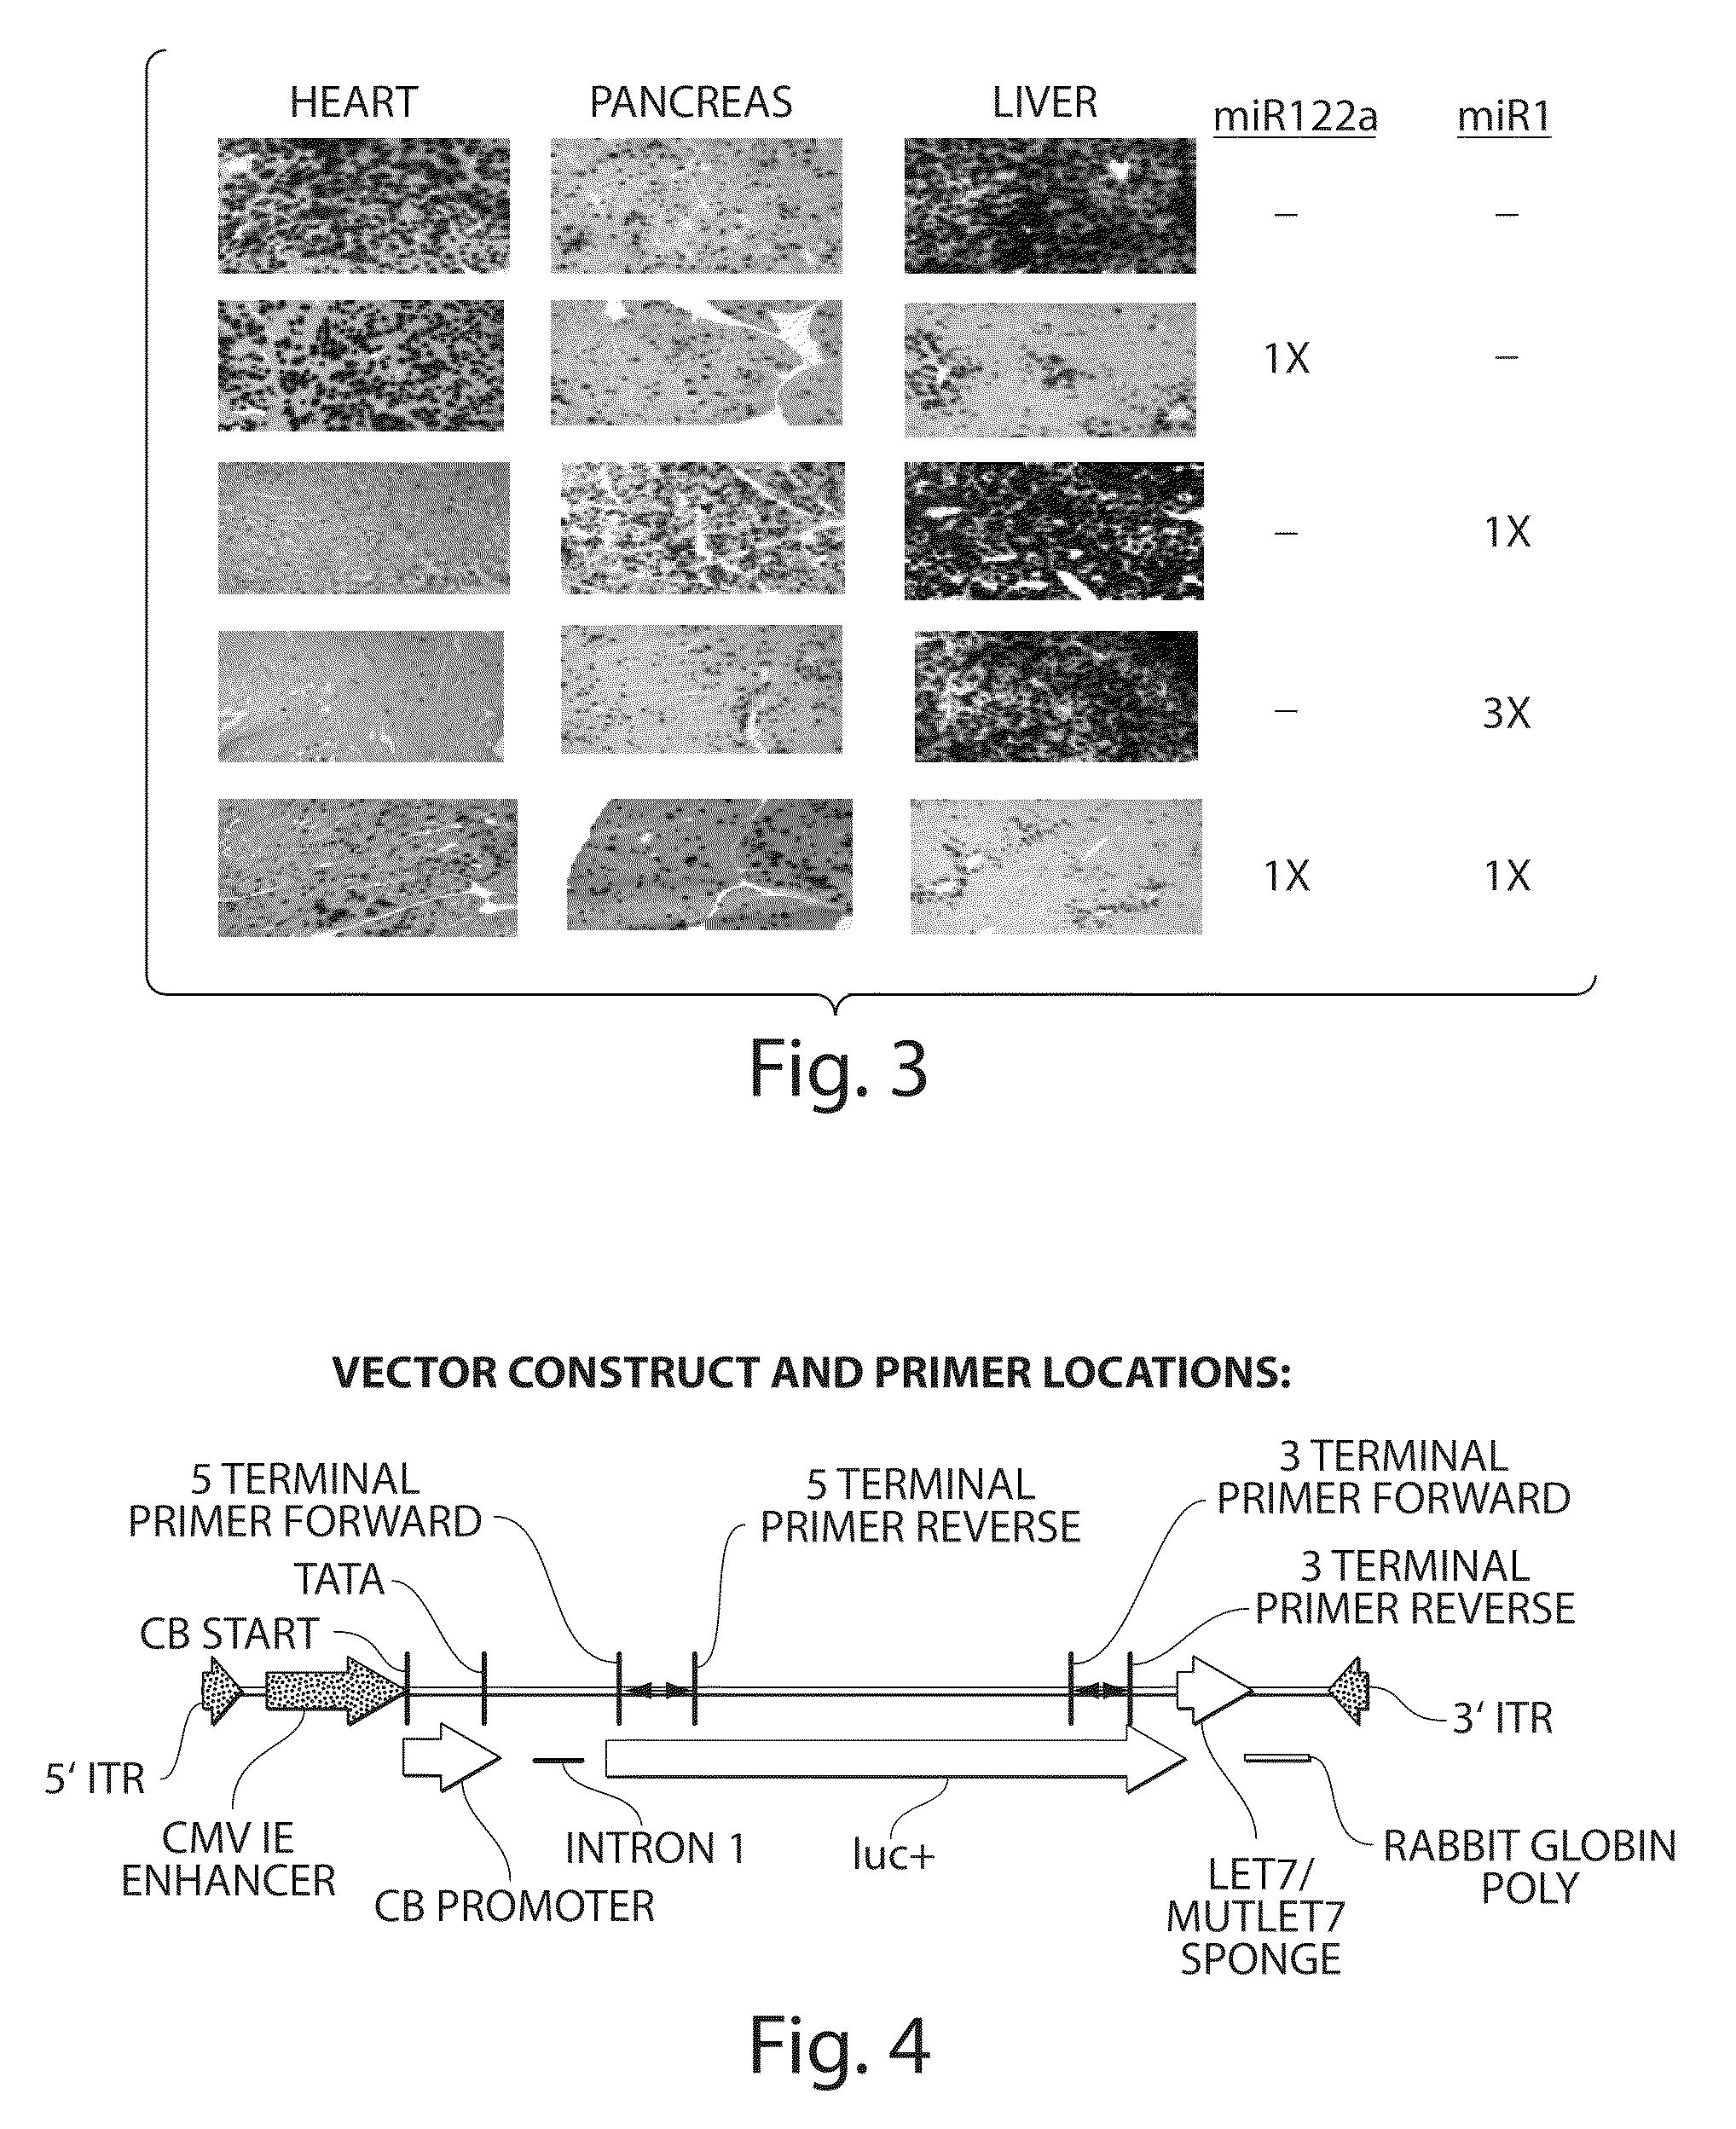 Isolation of novel AAV'S and uses thereof